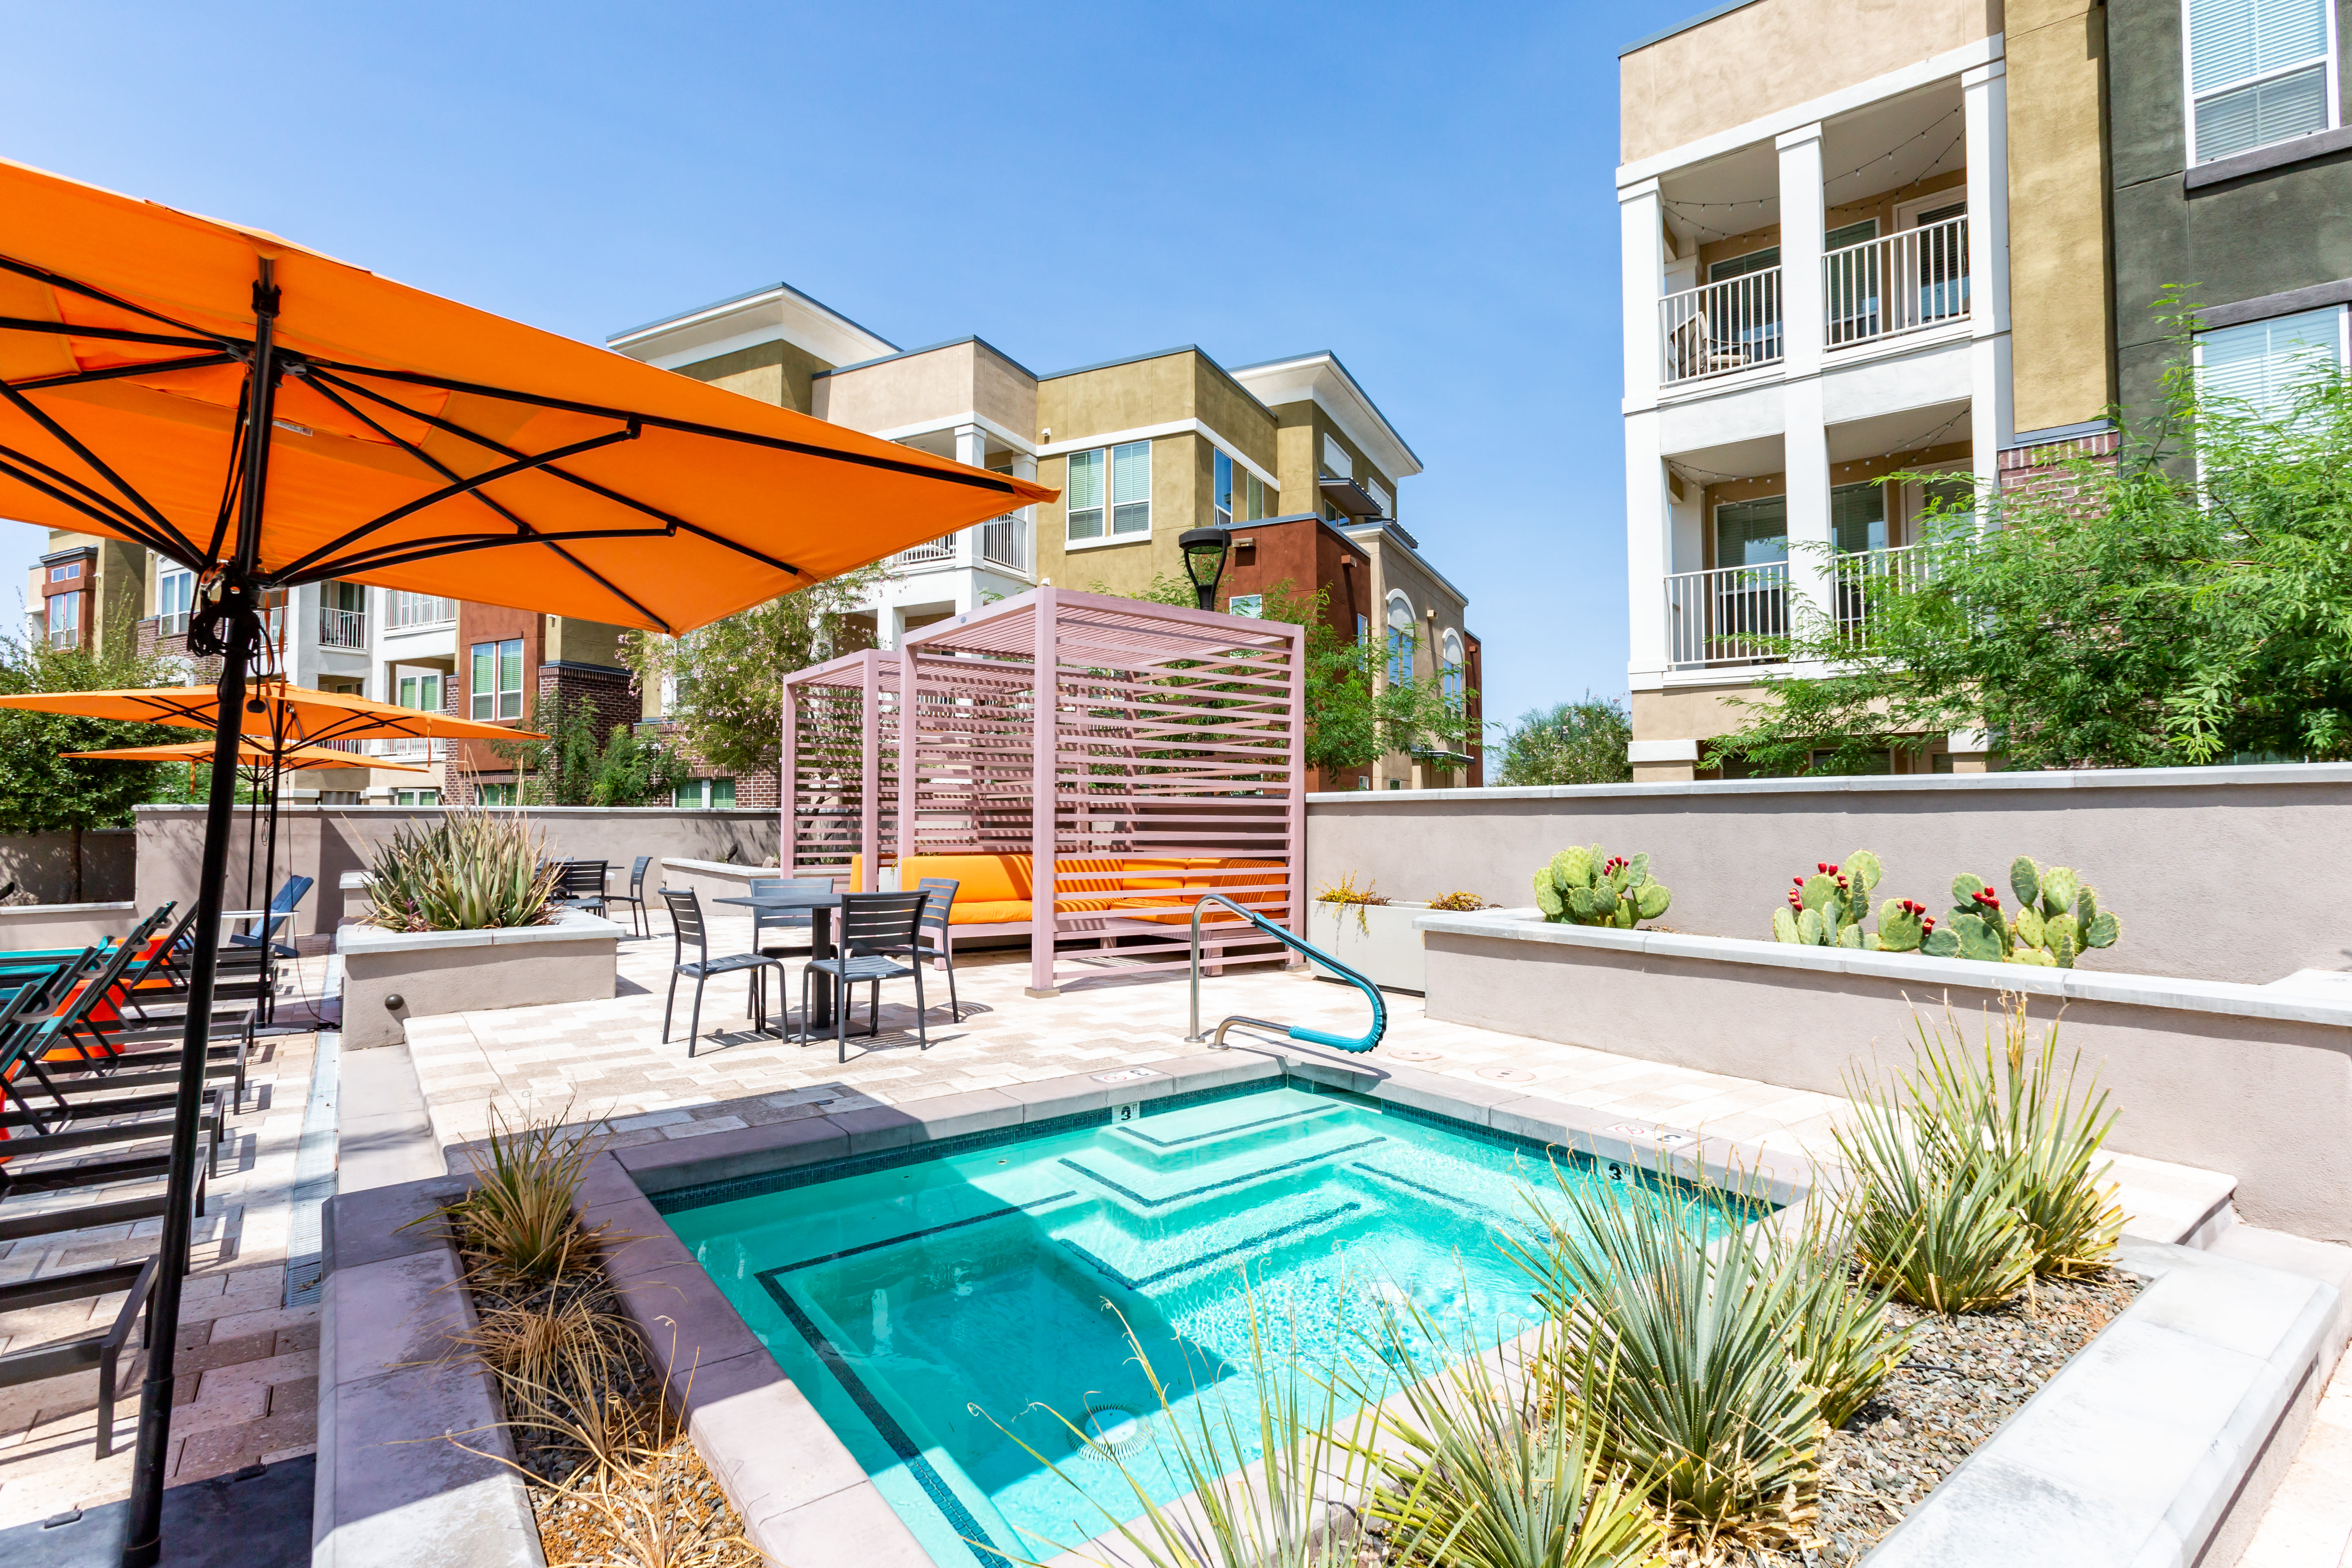 Children's splash area and sunny poolside cabana lounge seating at Town Commons in Gilbert, Arizona